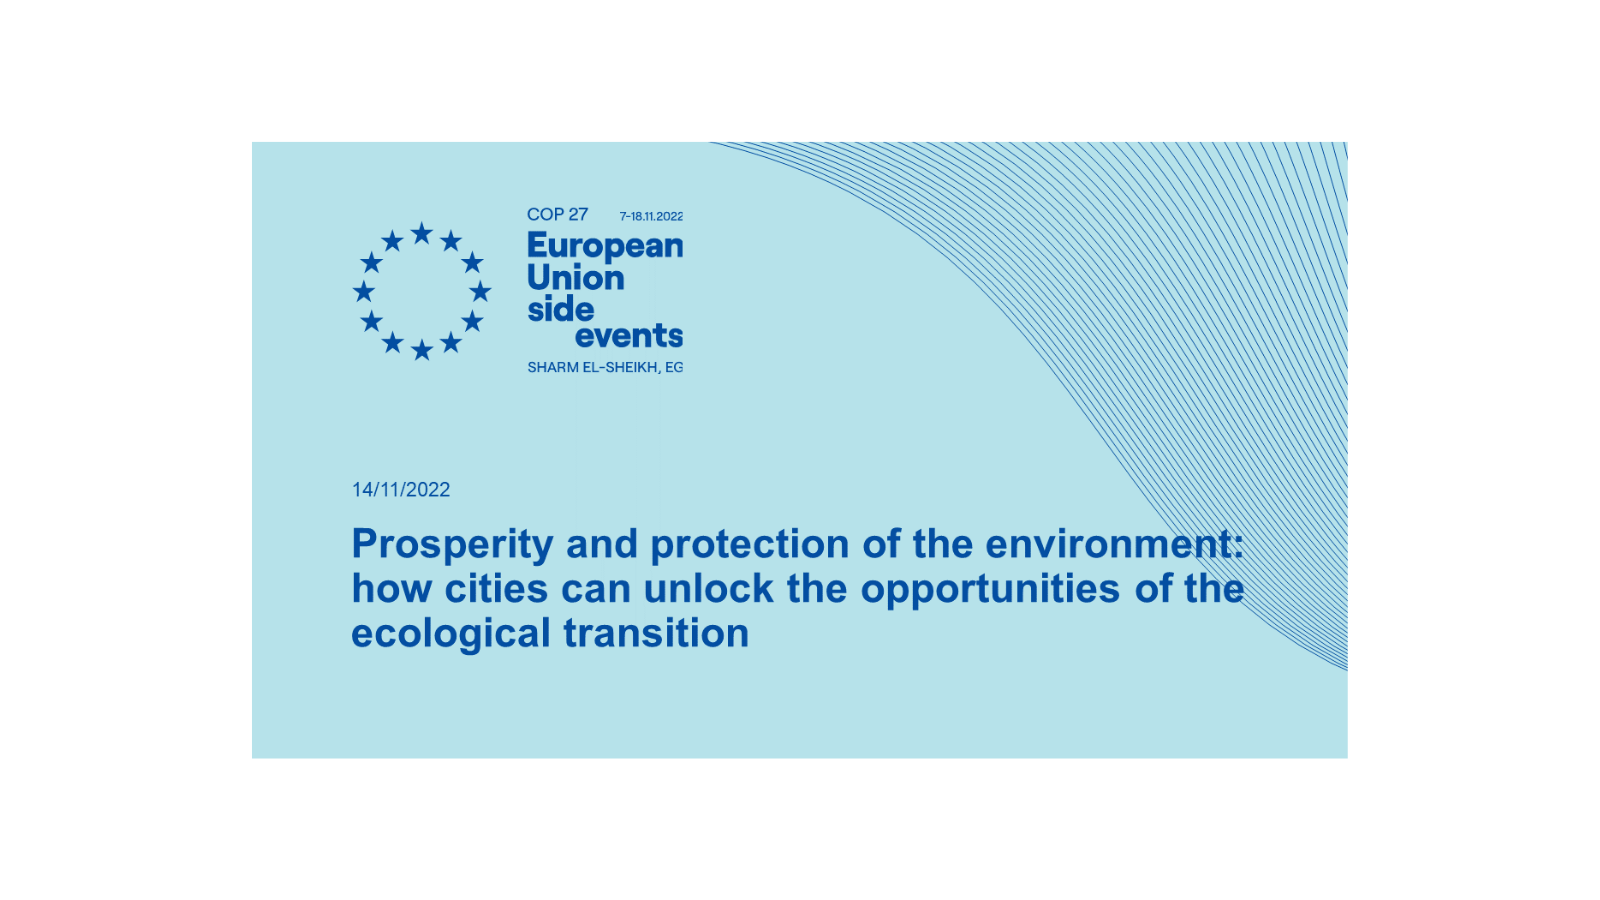 COP27 EU side event: Prosperity and protection of the environment